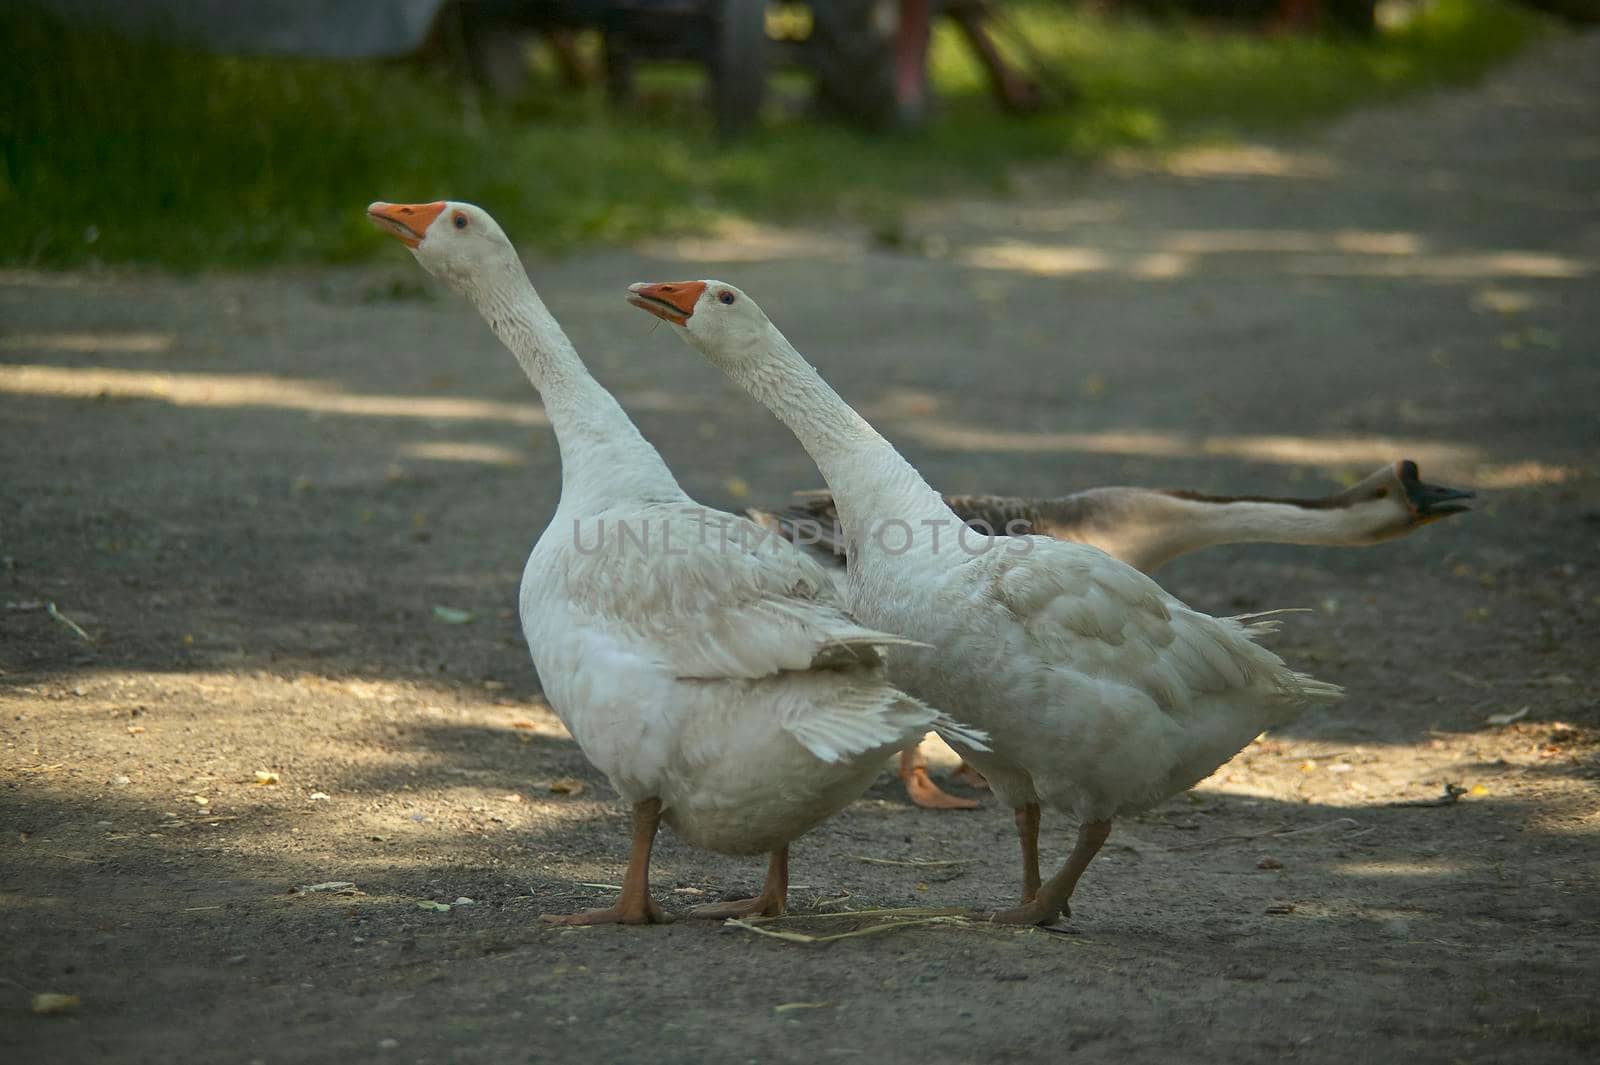 Geese on the farm 2 by pippocarlot